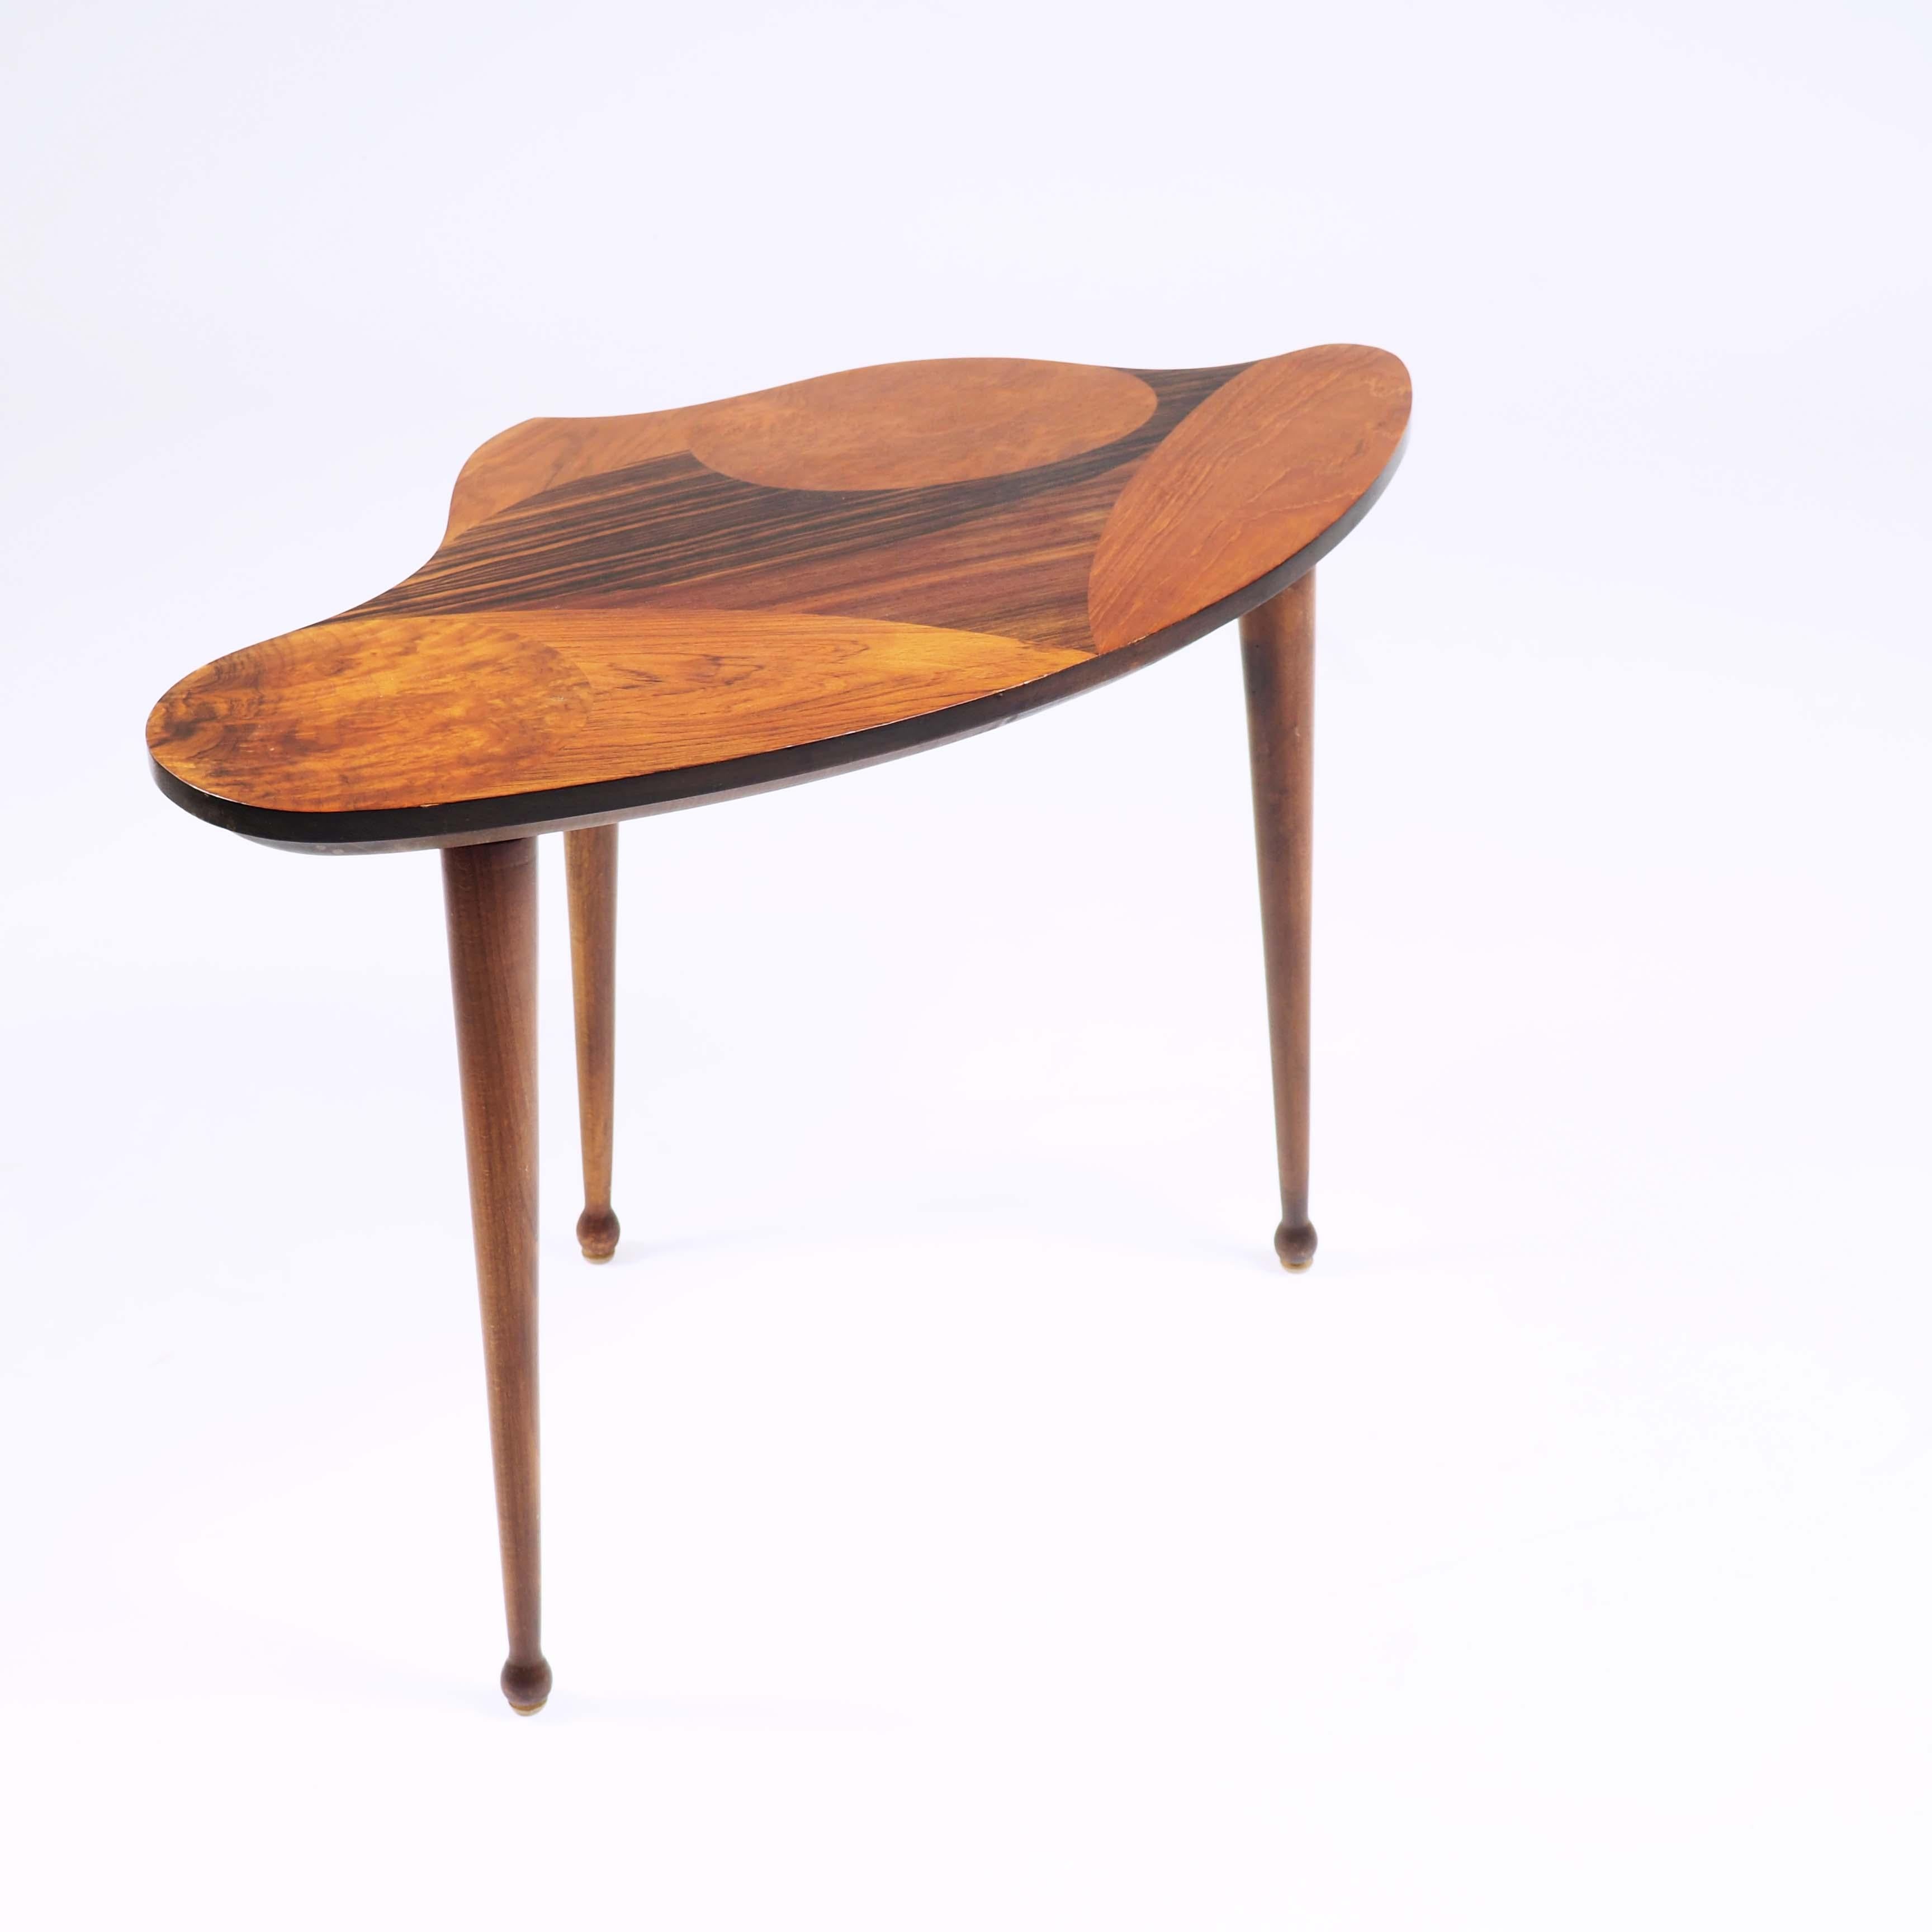 Organic Shaped Swedish Side Table with Inlaid Wood In Good Condition For Sale In Goteborg, SE